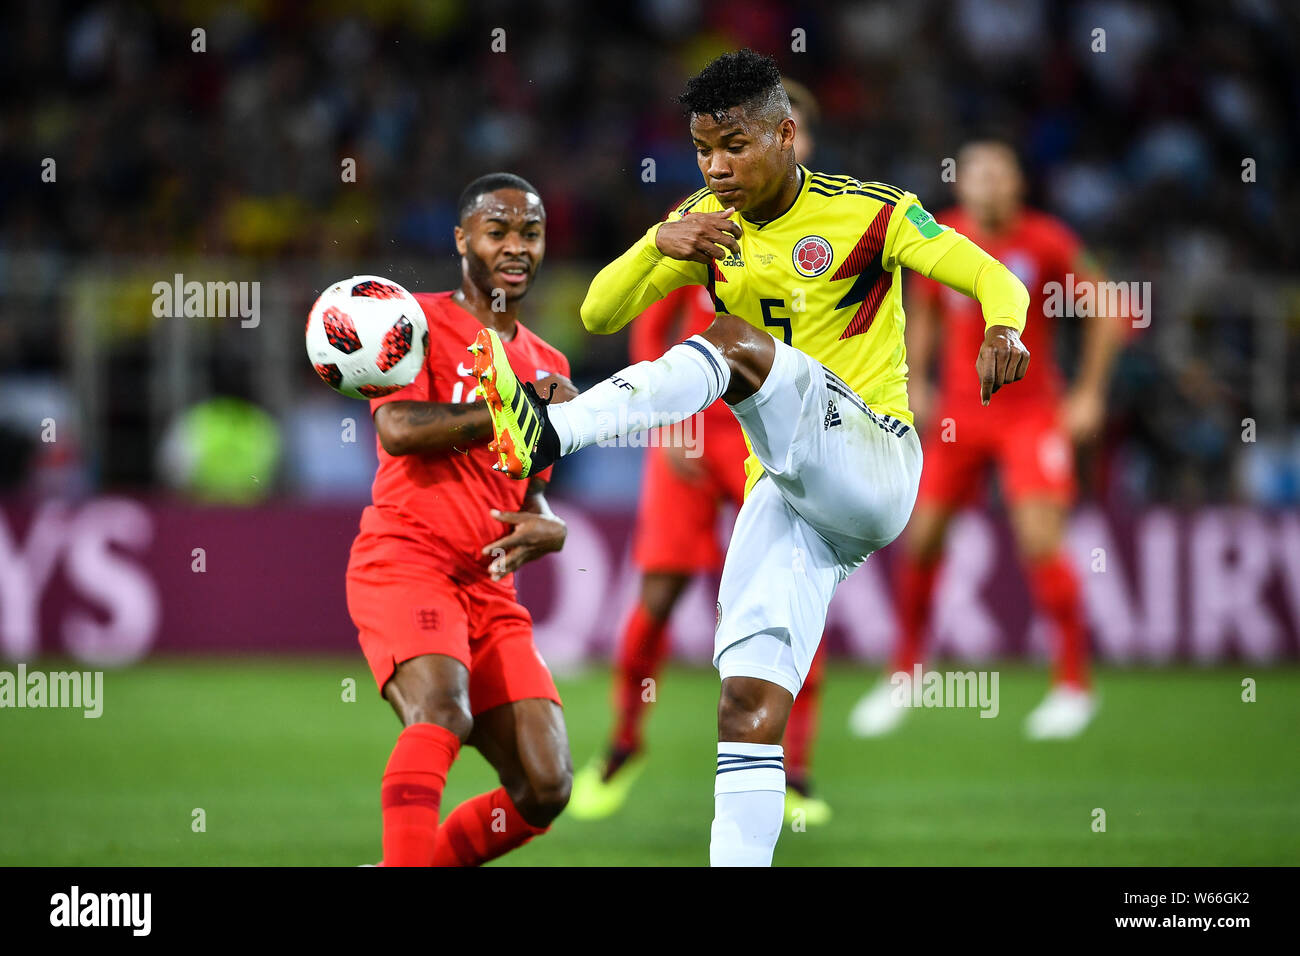 Wilmar Barrios of Columbia, right, challenges a player of England in their Round of 16 match during the 2018 FIFA World Cup in Moscow, Russia, 3 July Stock Photo